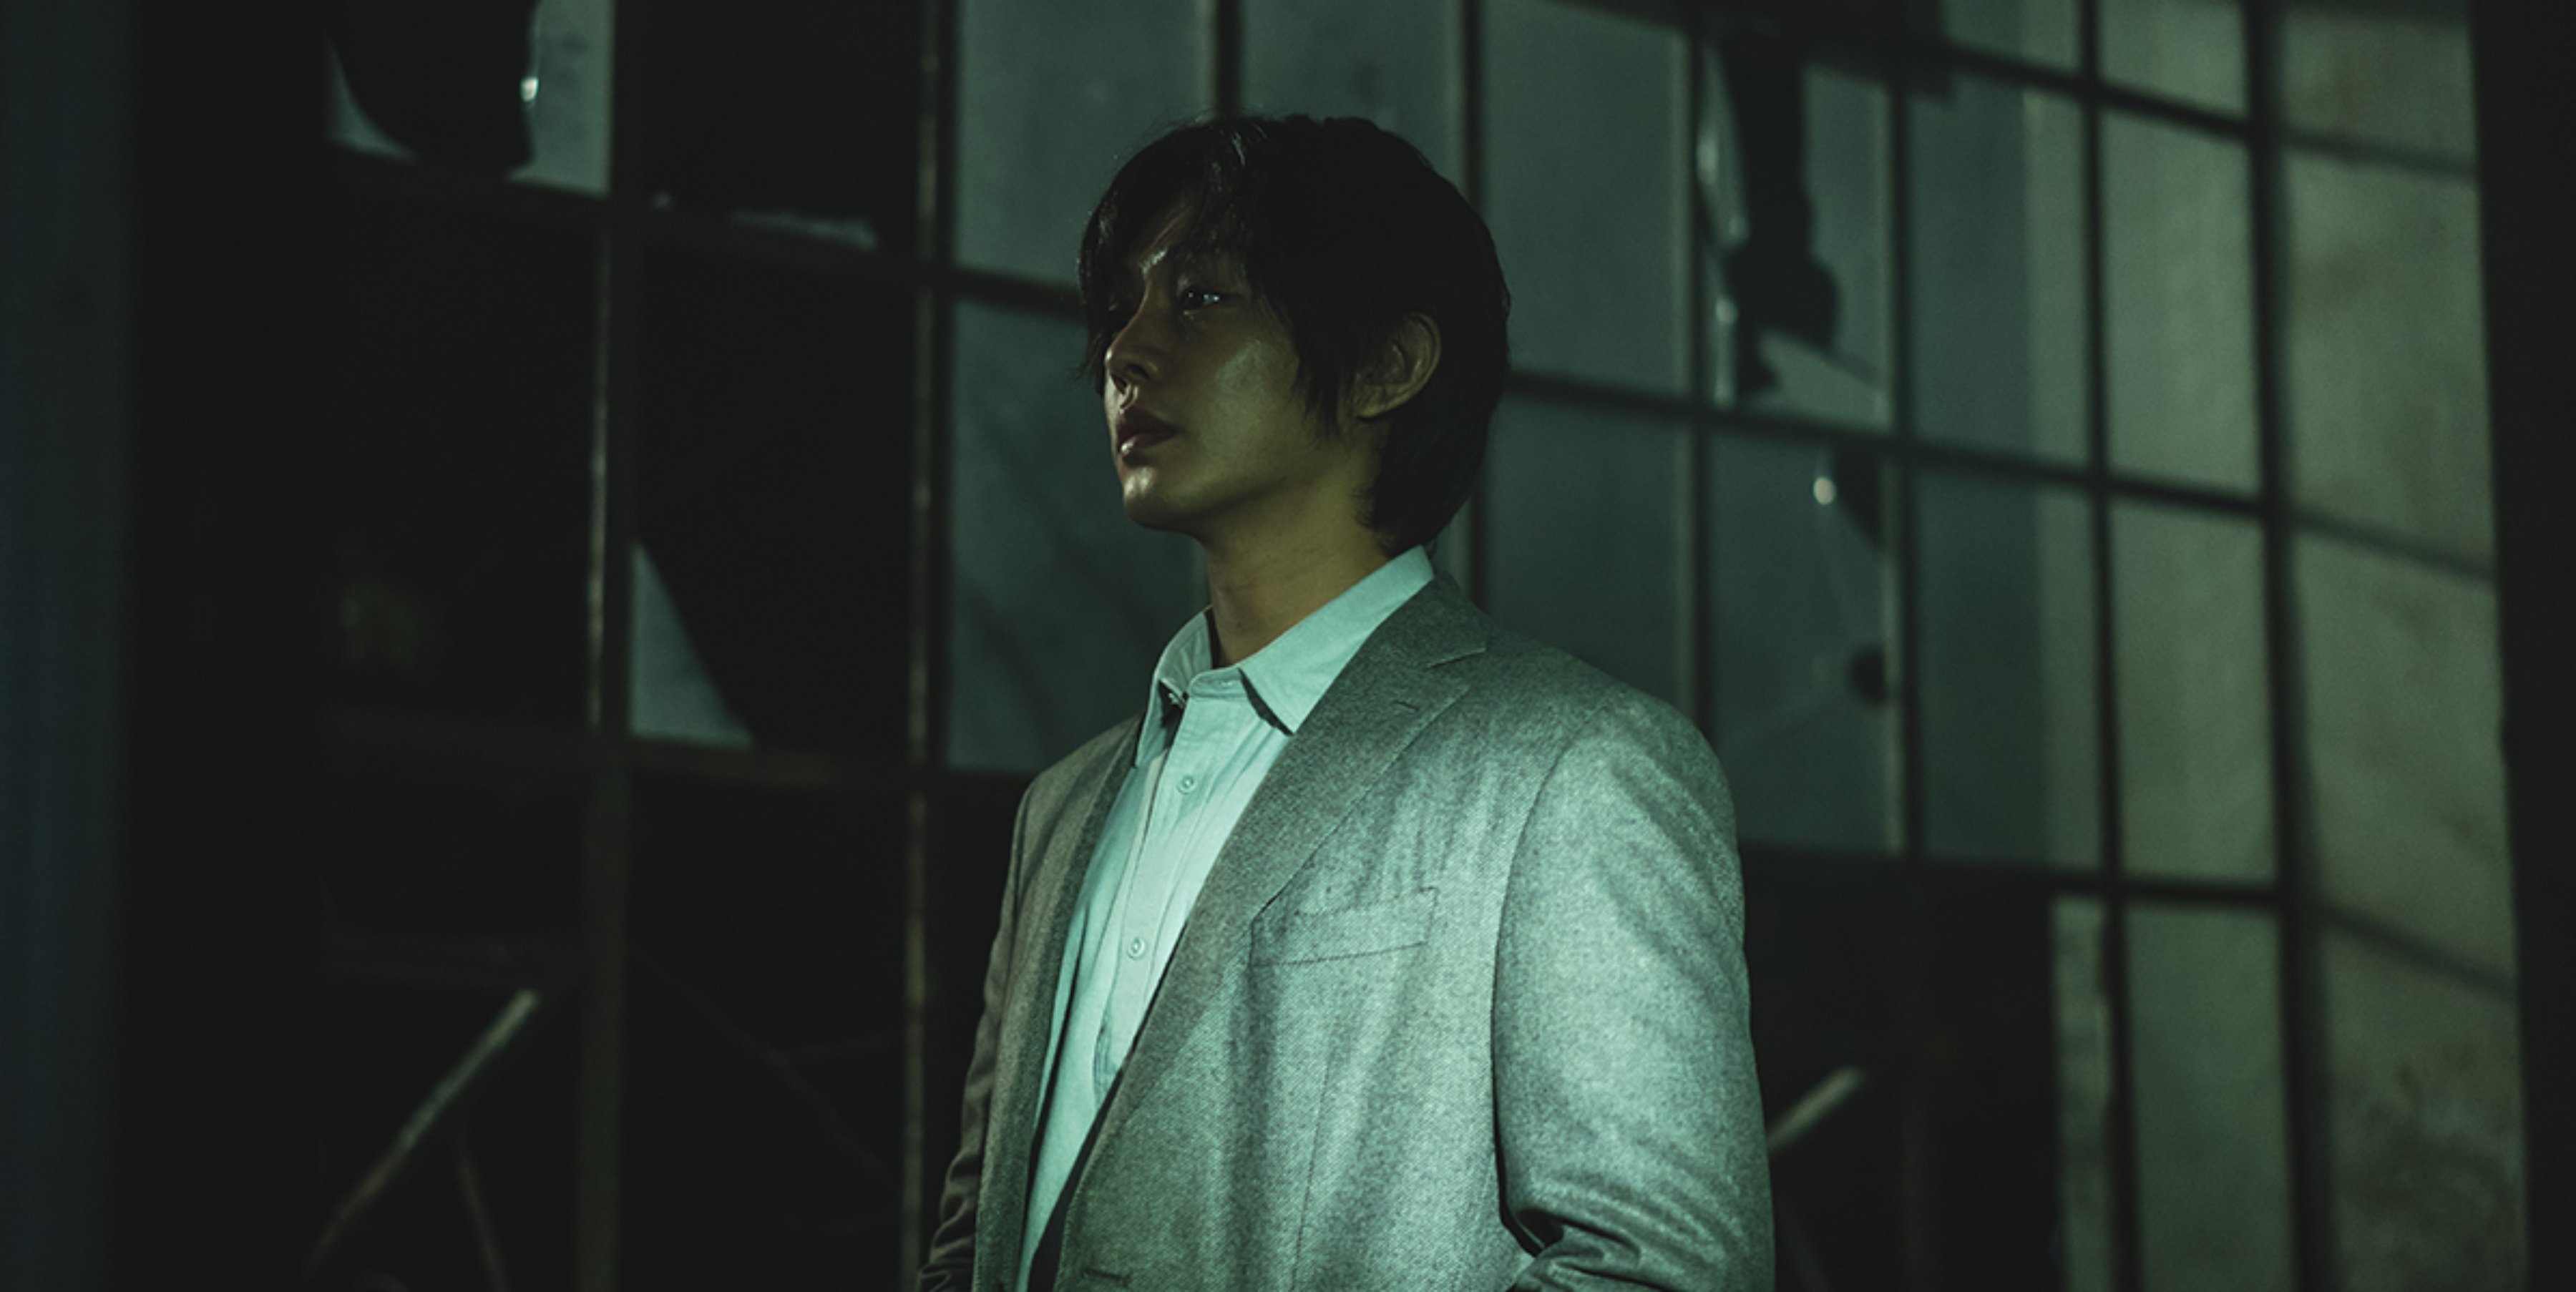 Actor Yoo Ah-In for Netflix's 'Hellbound' in dark lit room wearing grey suit and white shirt